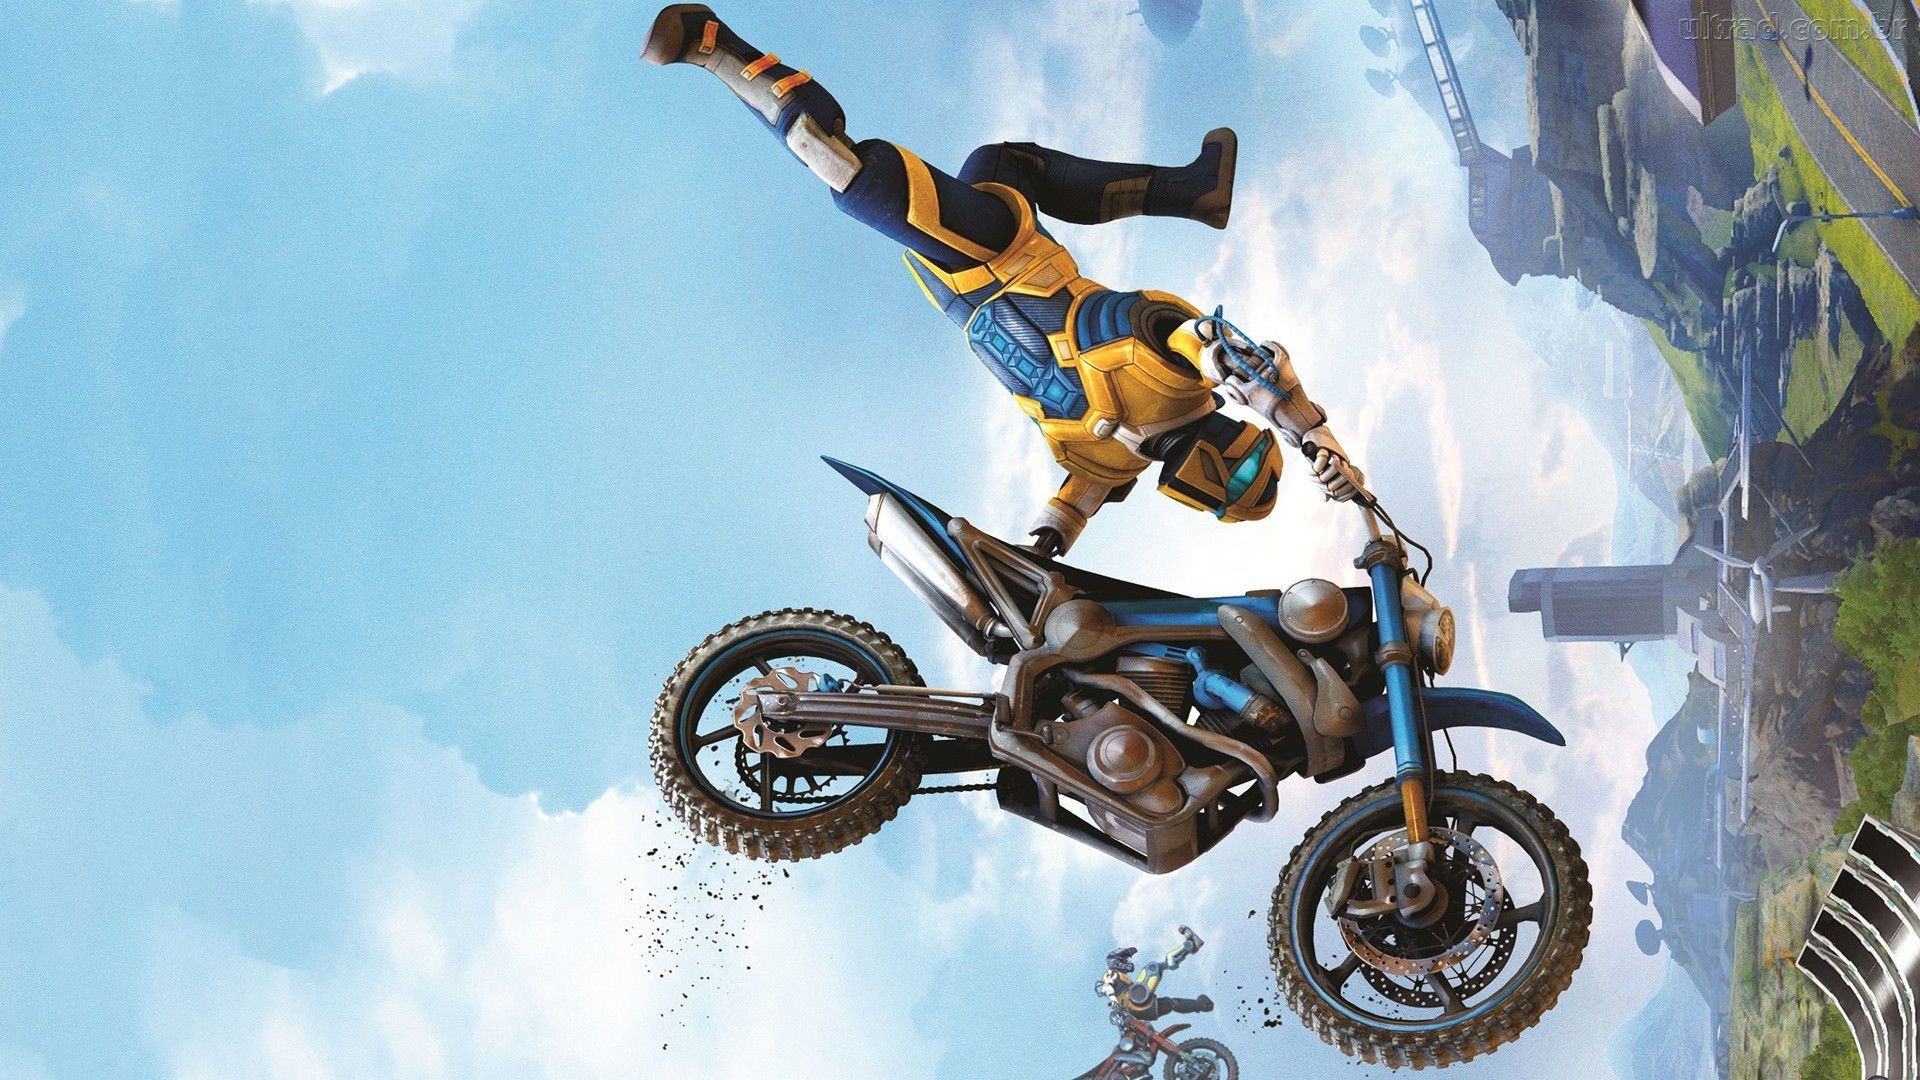 Motorcyclist in the game Trials fusion wallpaper and image